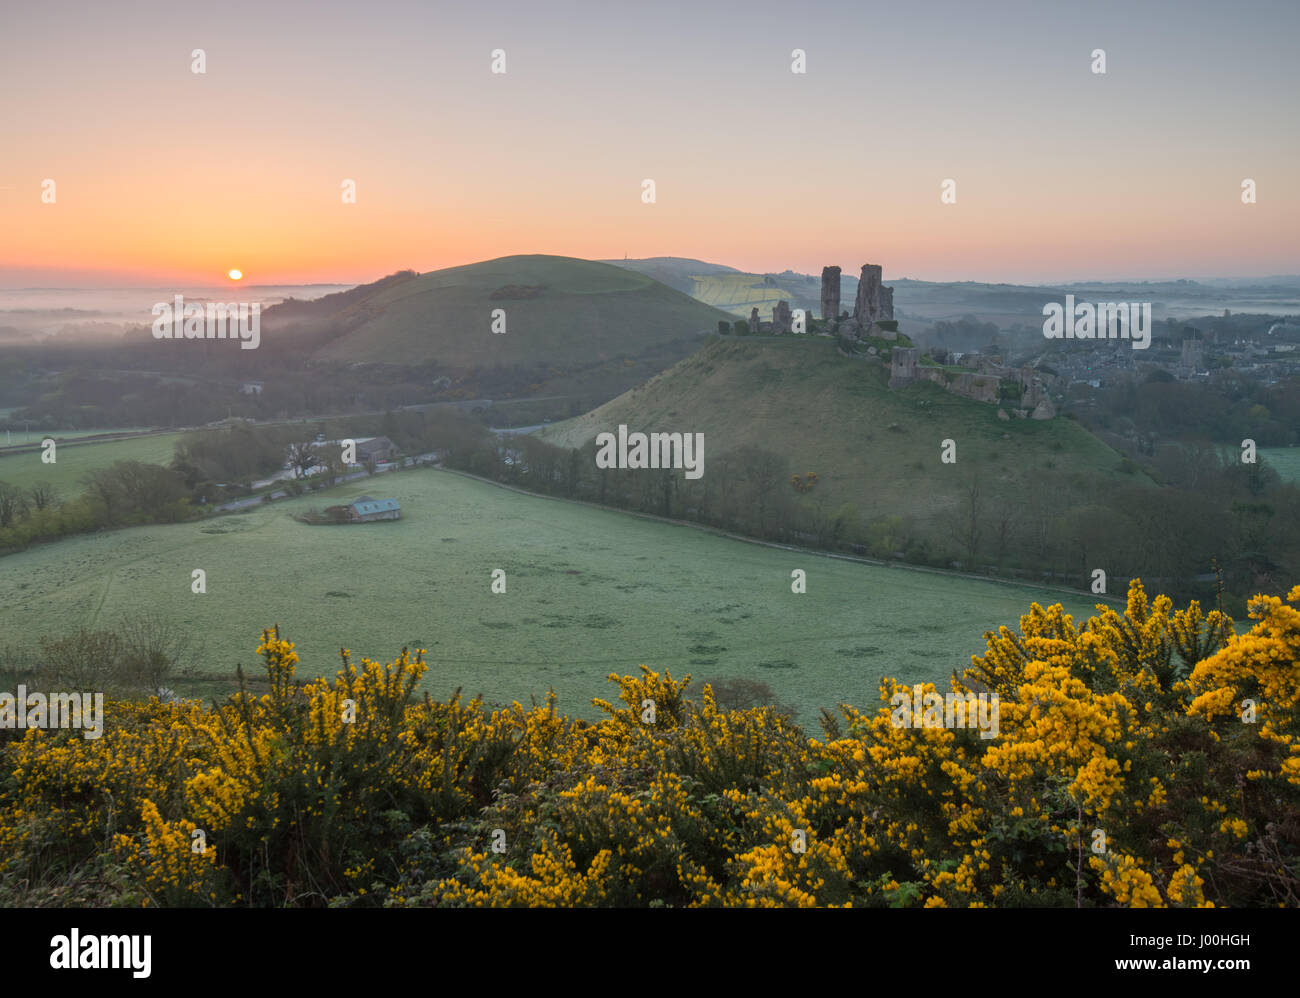 Corfe Castle, Dorset, UK. 8th April 2017. Glorious misty crisp sunrise over the Isle of Purbeck and the iconic, historic ruins of Corfe Castle. © DTNe Stock Photo